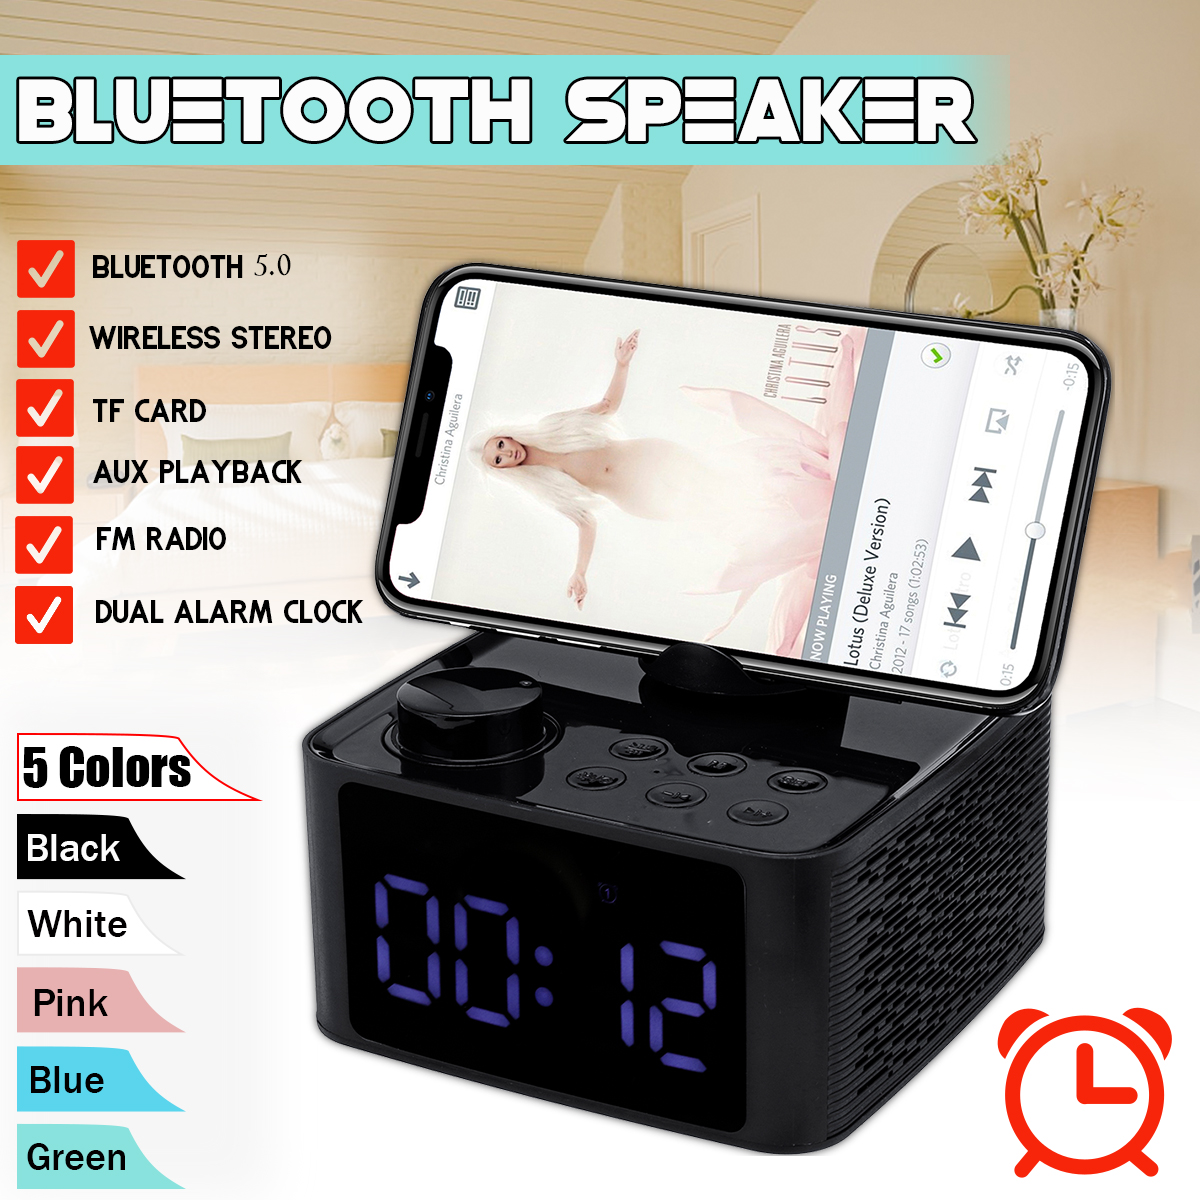 2-In-1-Wireless-Stereo-bluetooth-50-Speaker-Dual-Alarm-Clock-Subwoofer-Hifi-Music-Player-With-Phone--1432185-1